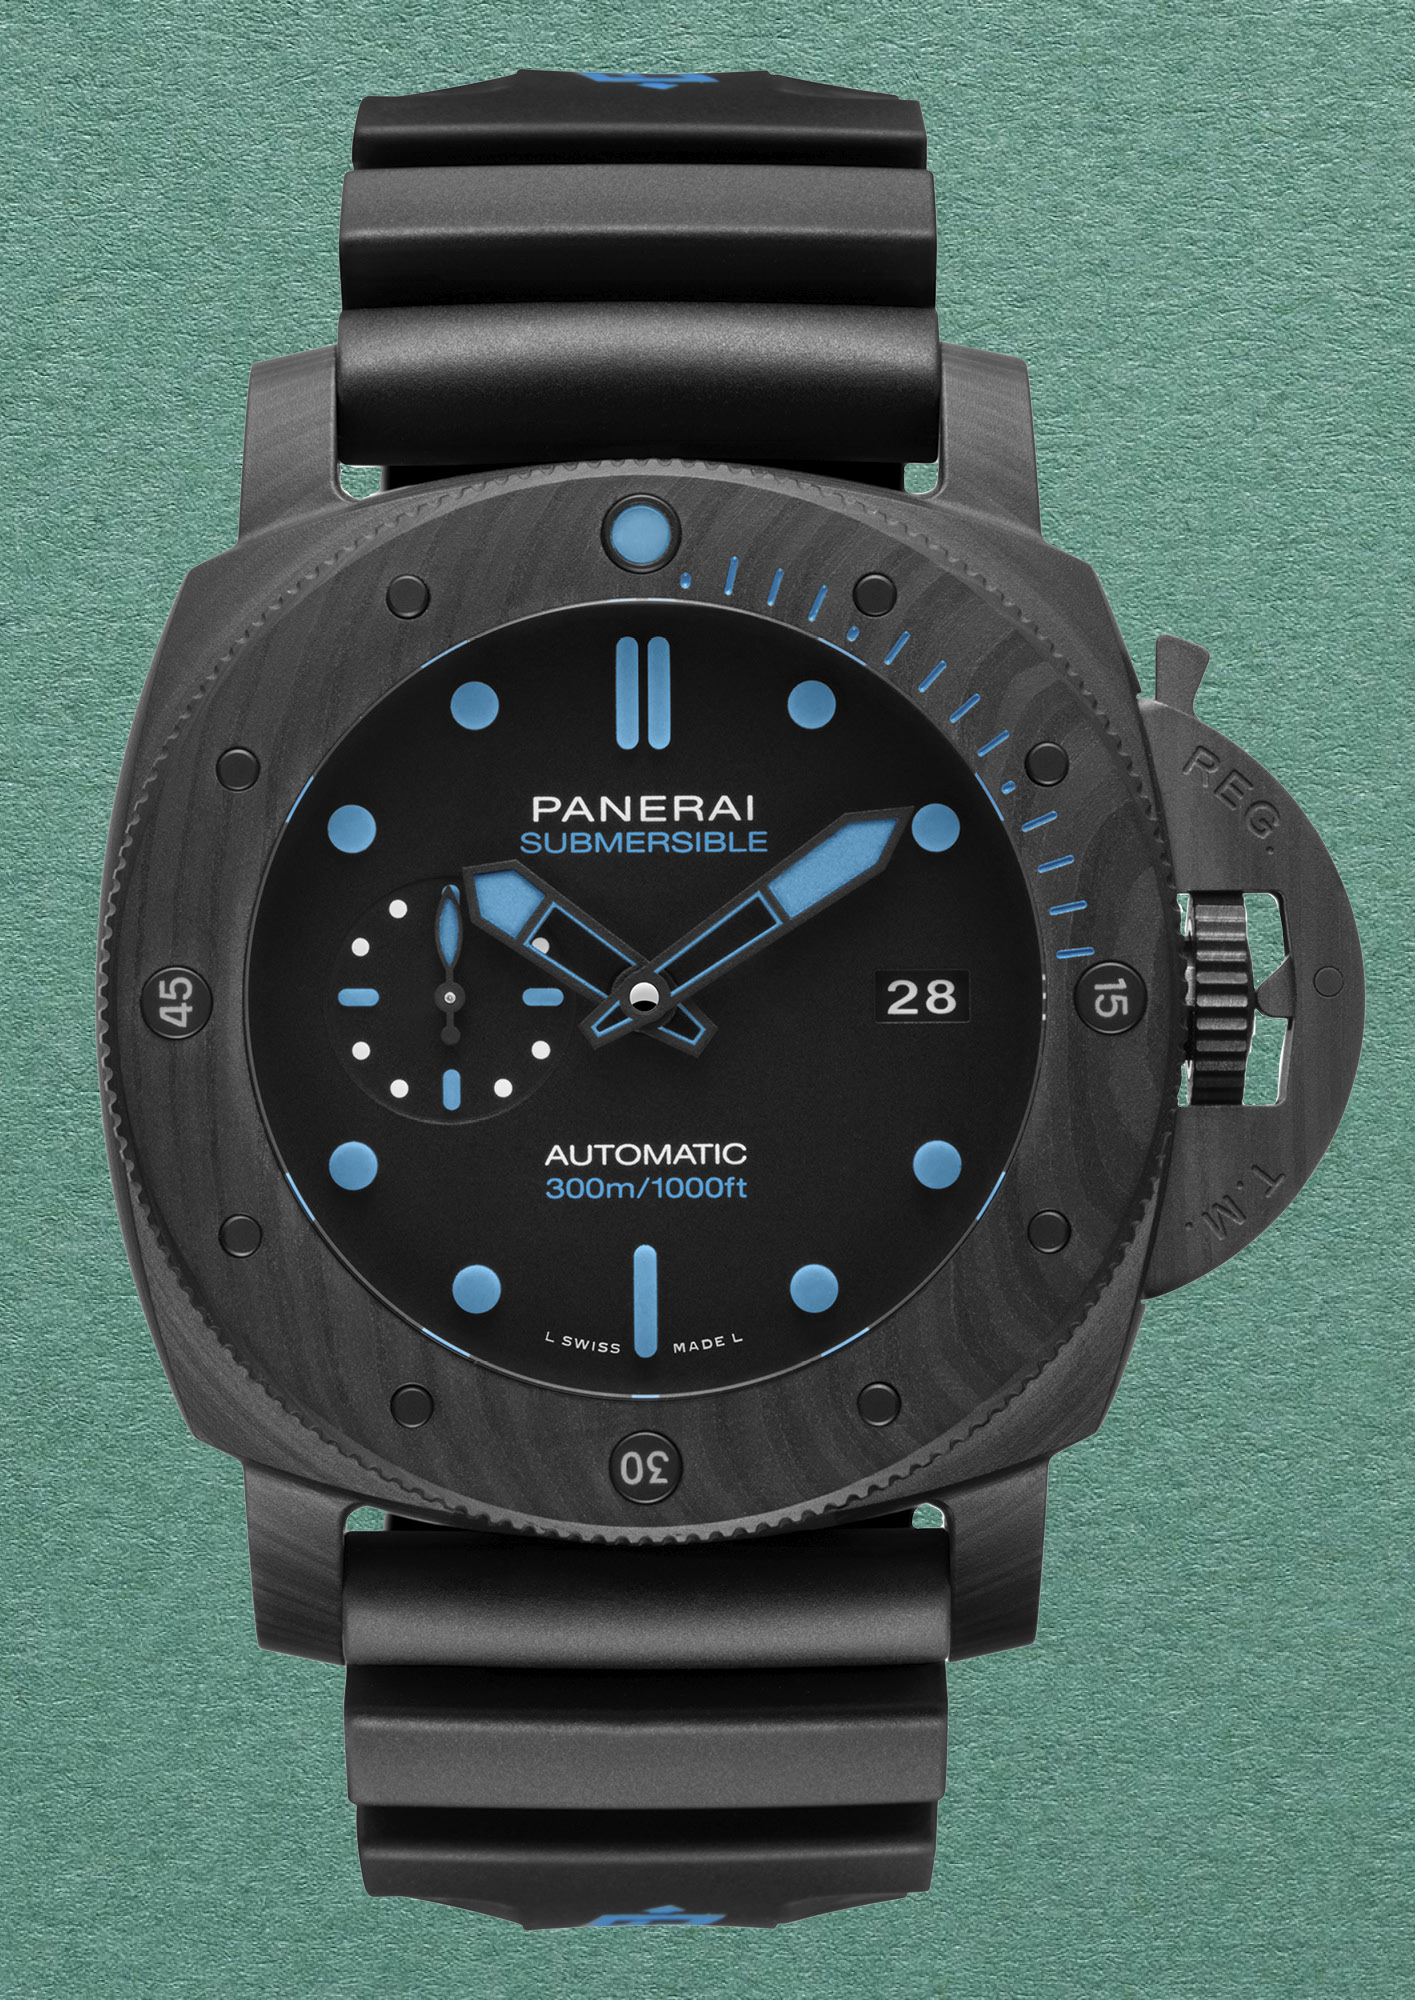 New adventures: Panerai teams up with explorer Andy Torbet - Brummell